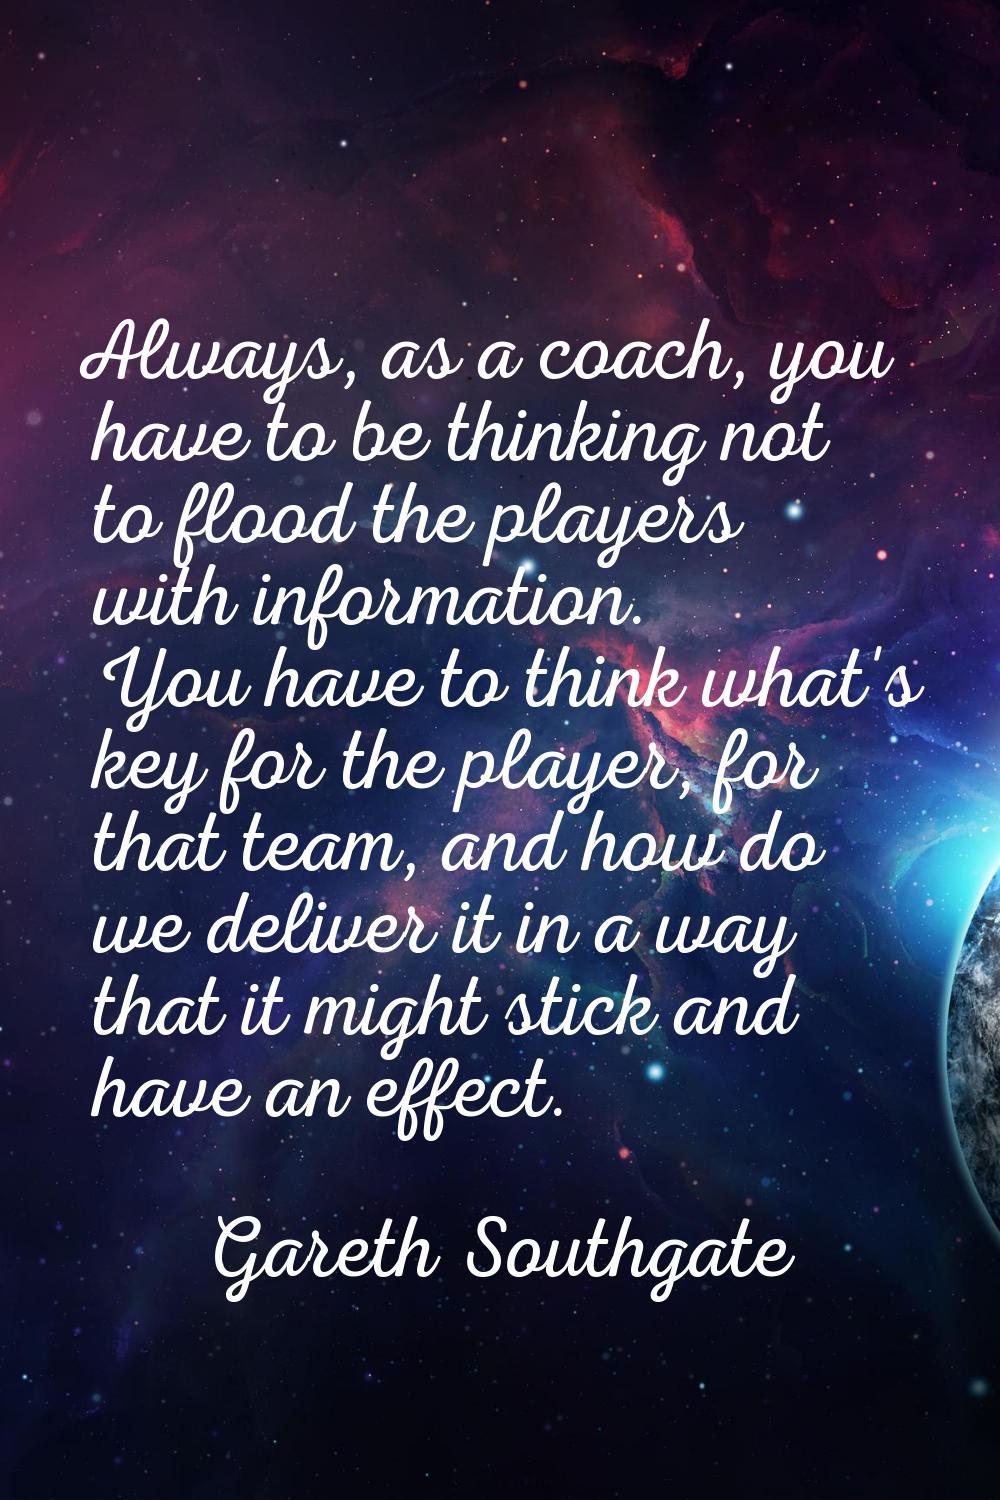 Always, as a coach, you have to be thinking not to flood the players with information. You have to 